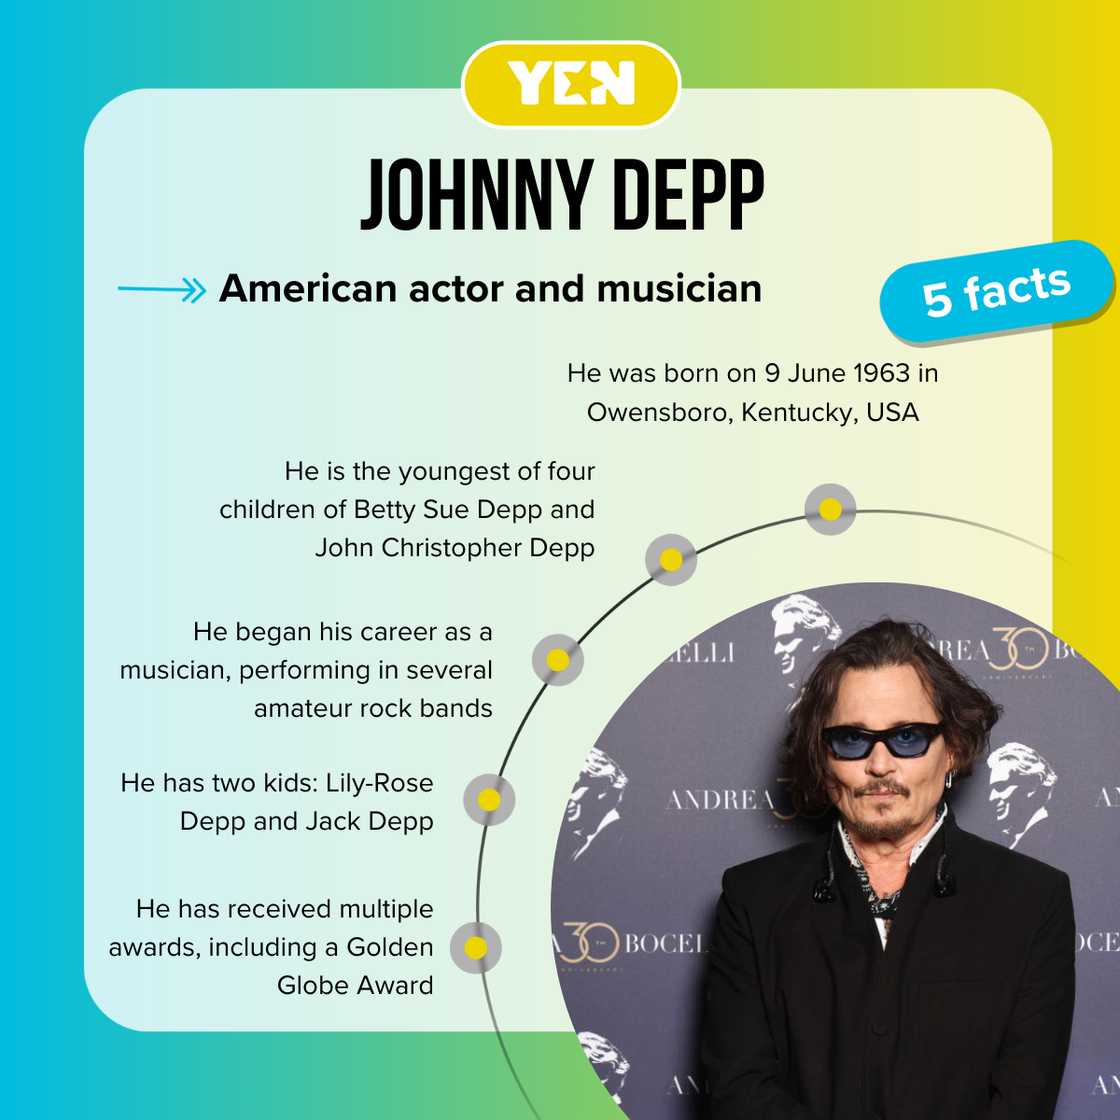 Top 5 facts about Johnny Depp